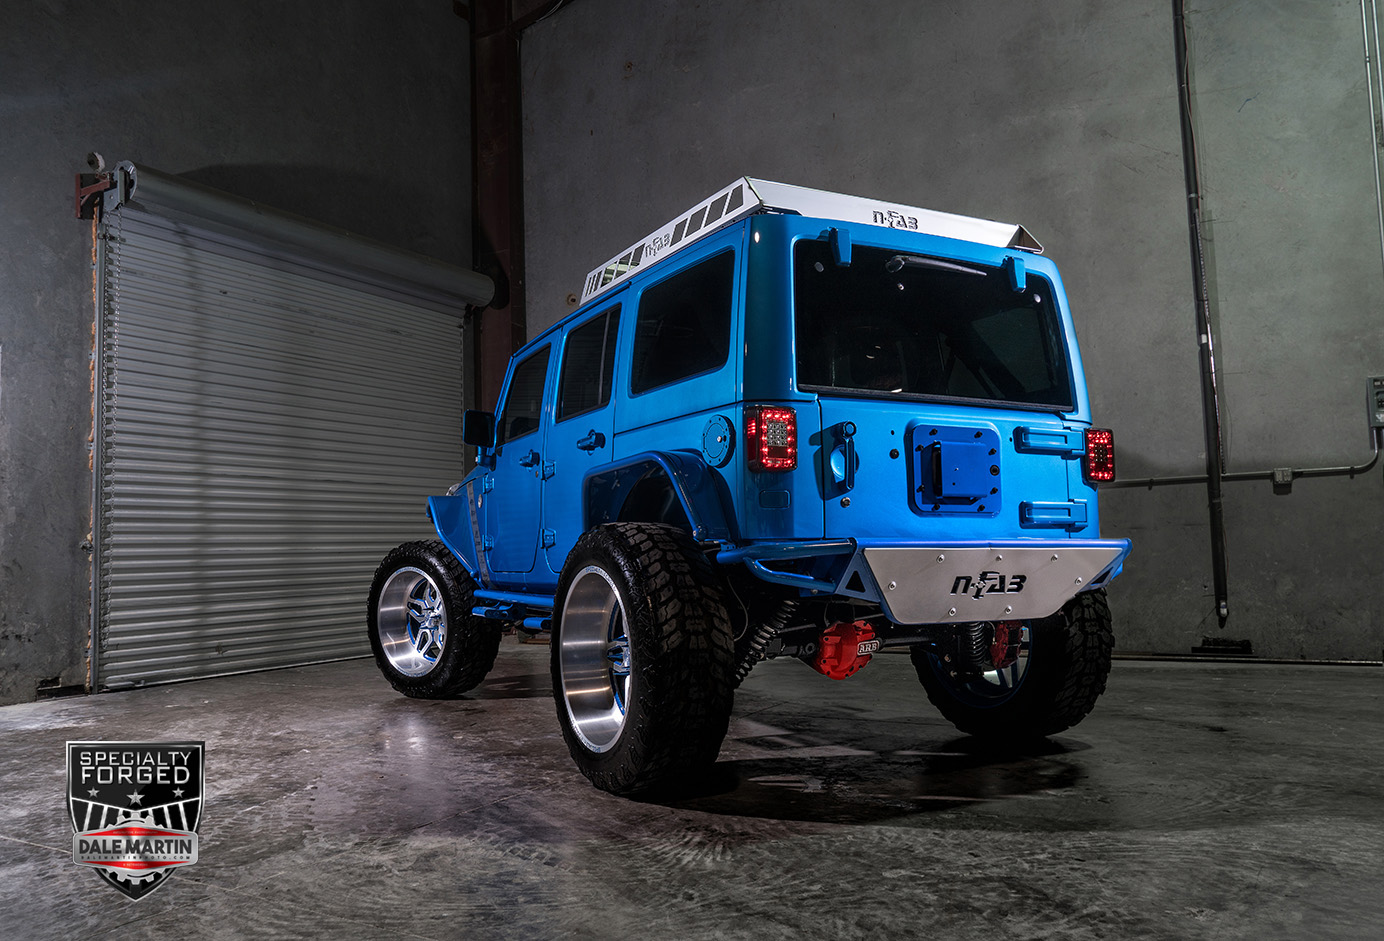 Jeep Wrangler | SF023 24x12 - SPECIALTY FORGED WHEELS